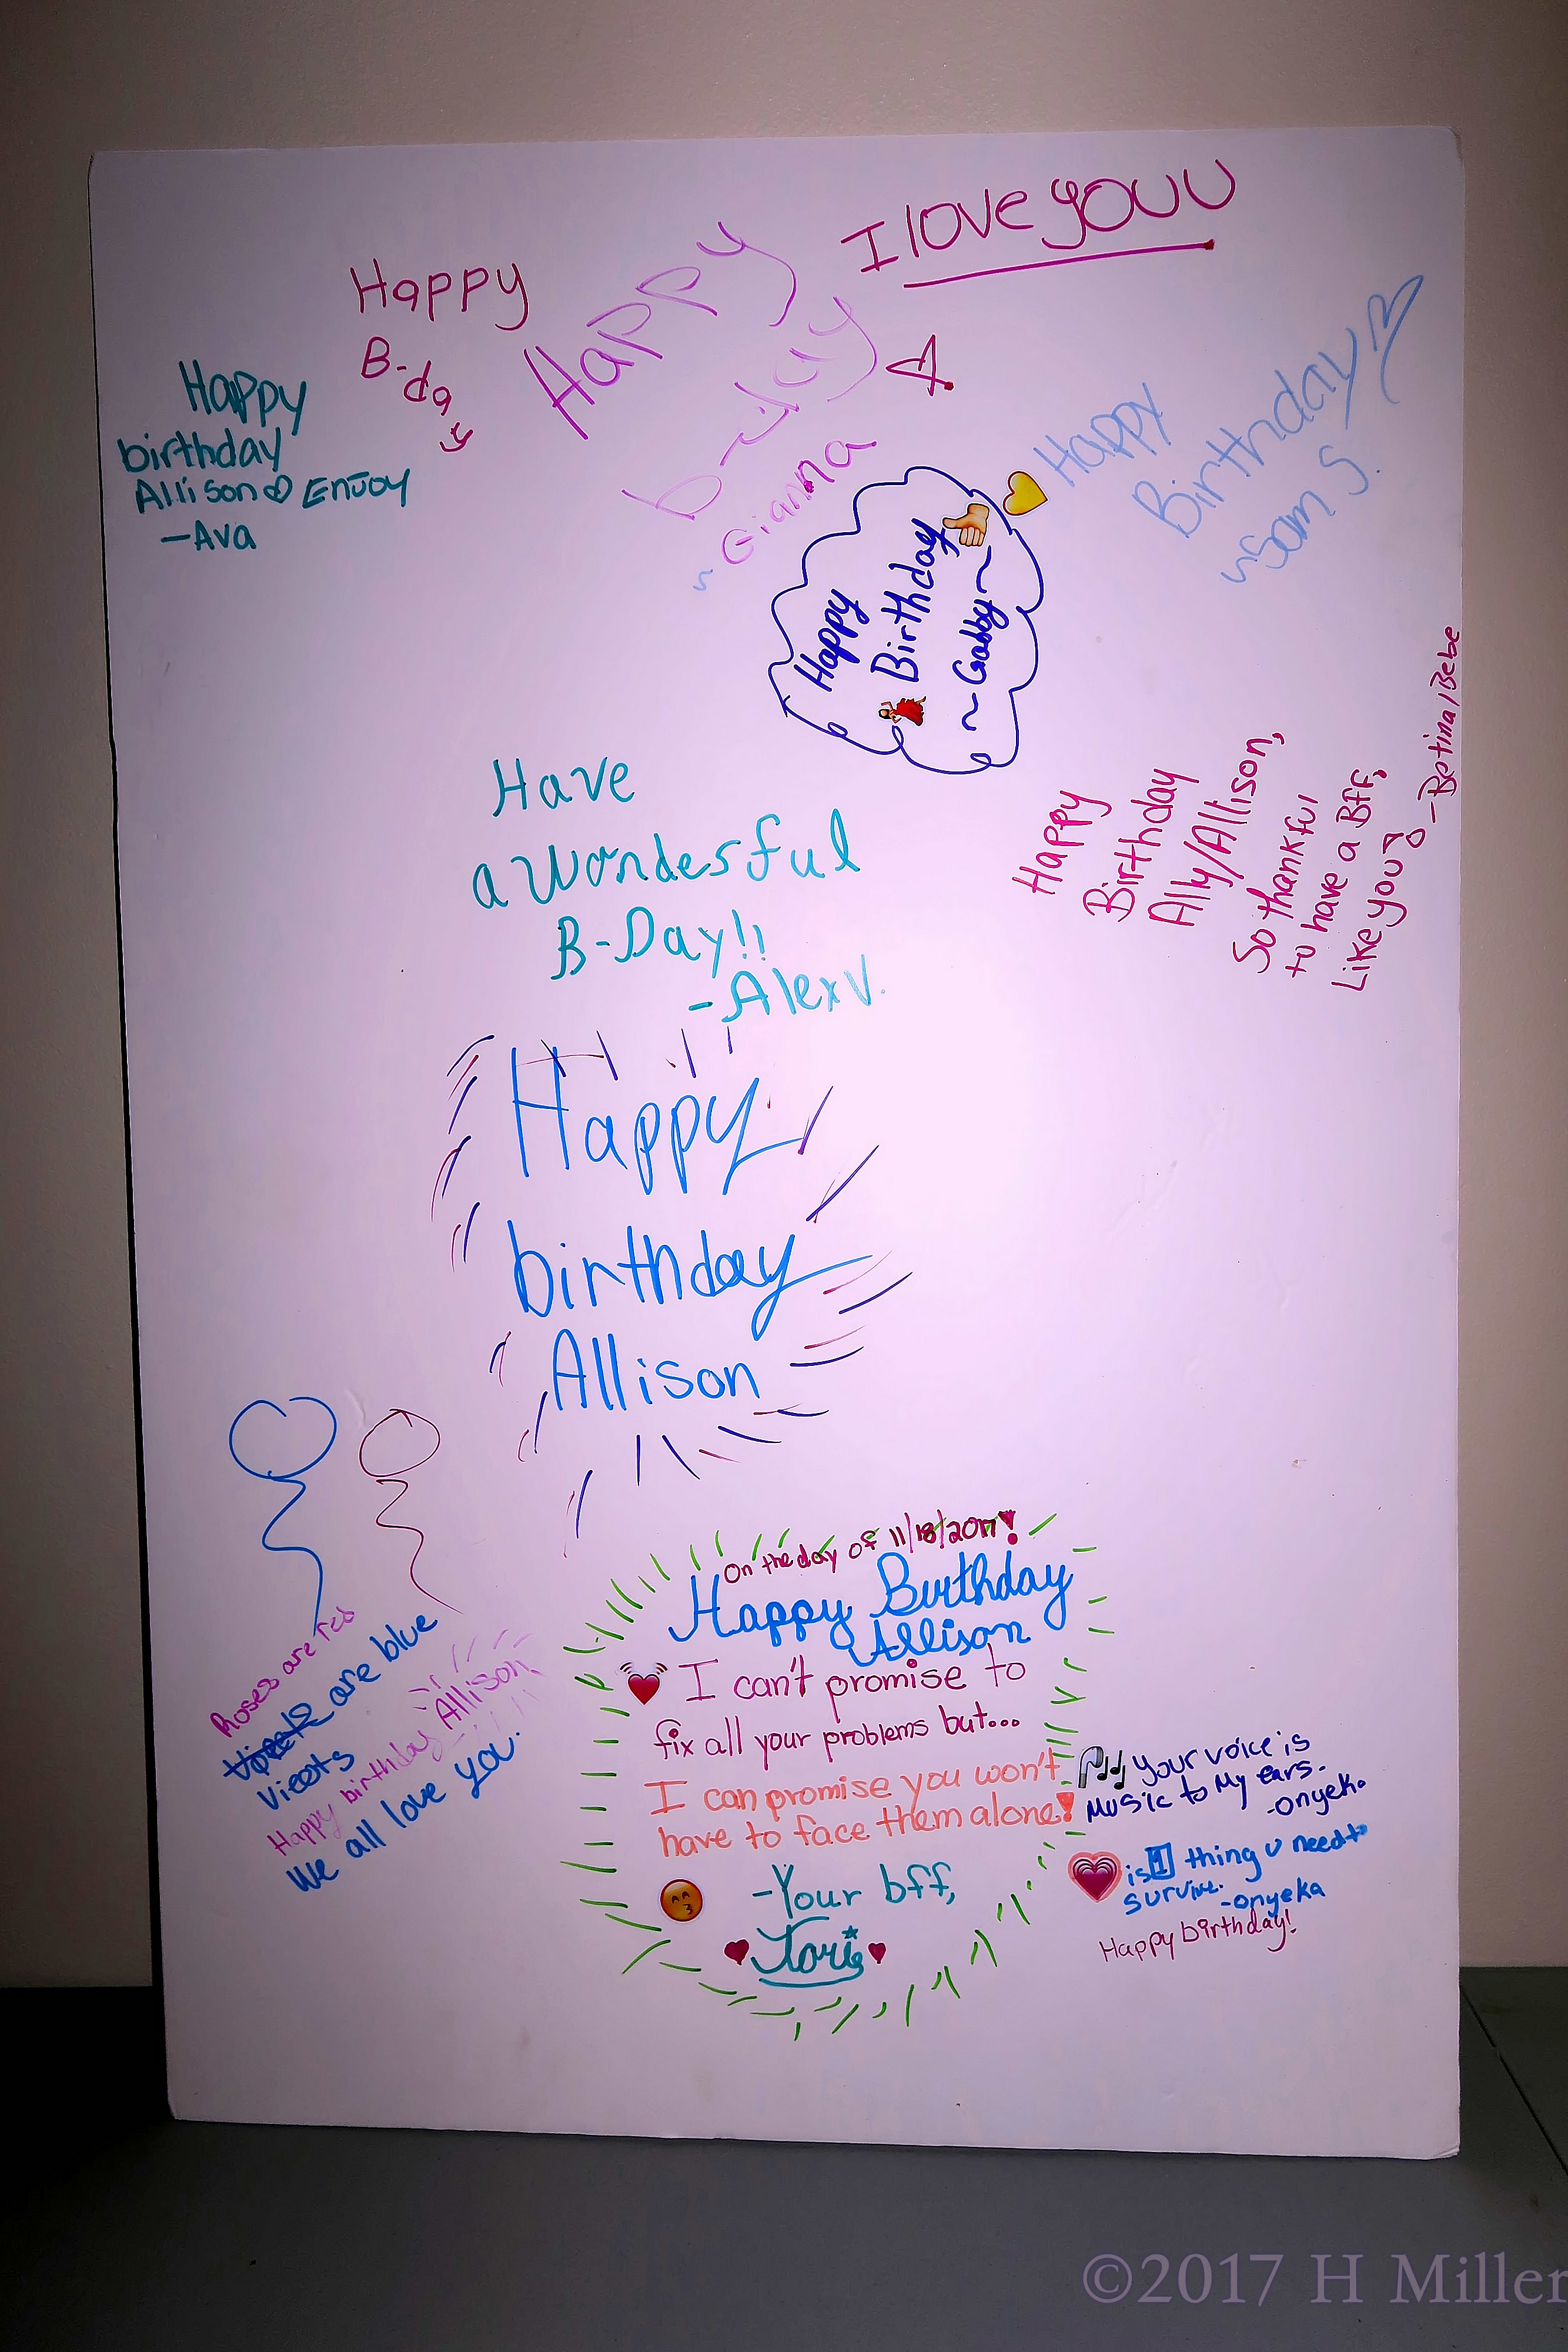 What An Awesome Kids Spa Birthday Card Allison's Friends Designed For Her! 